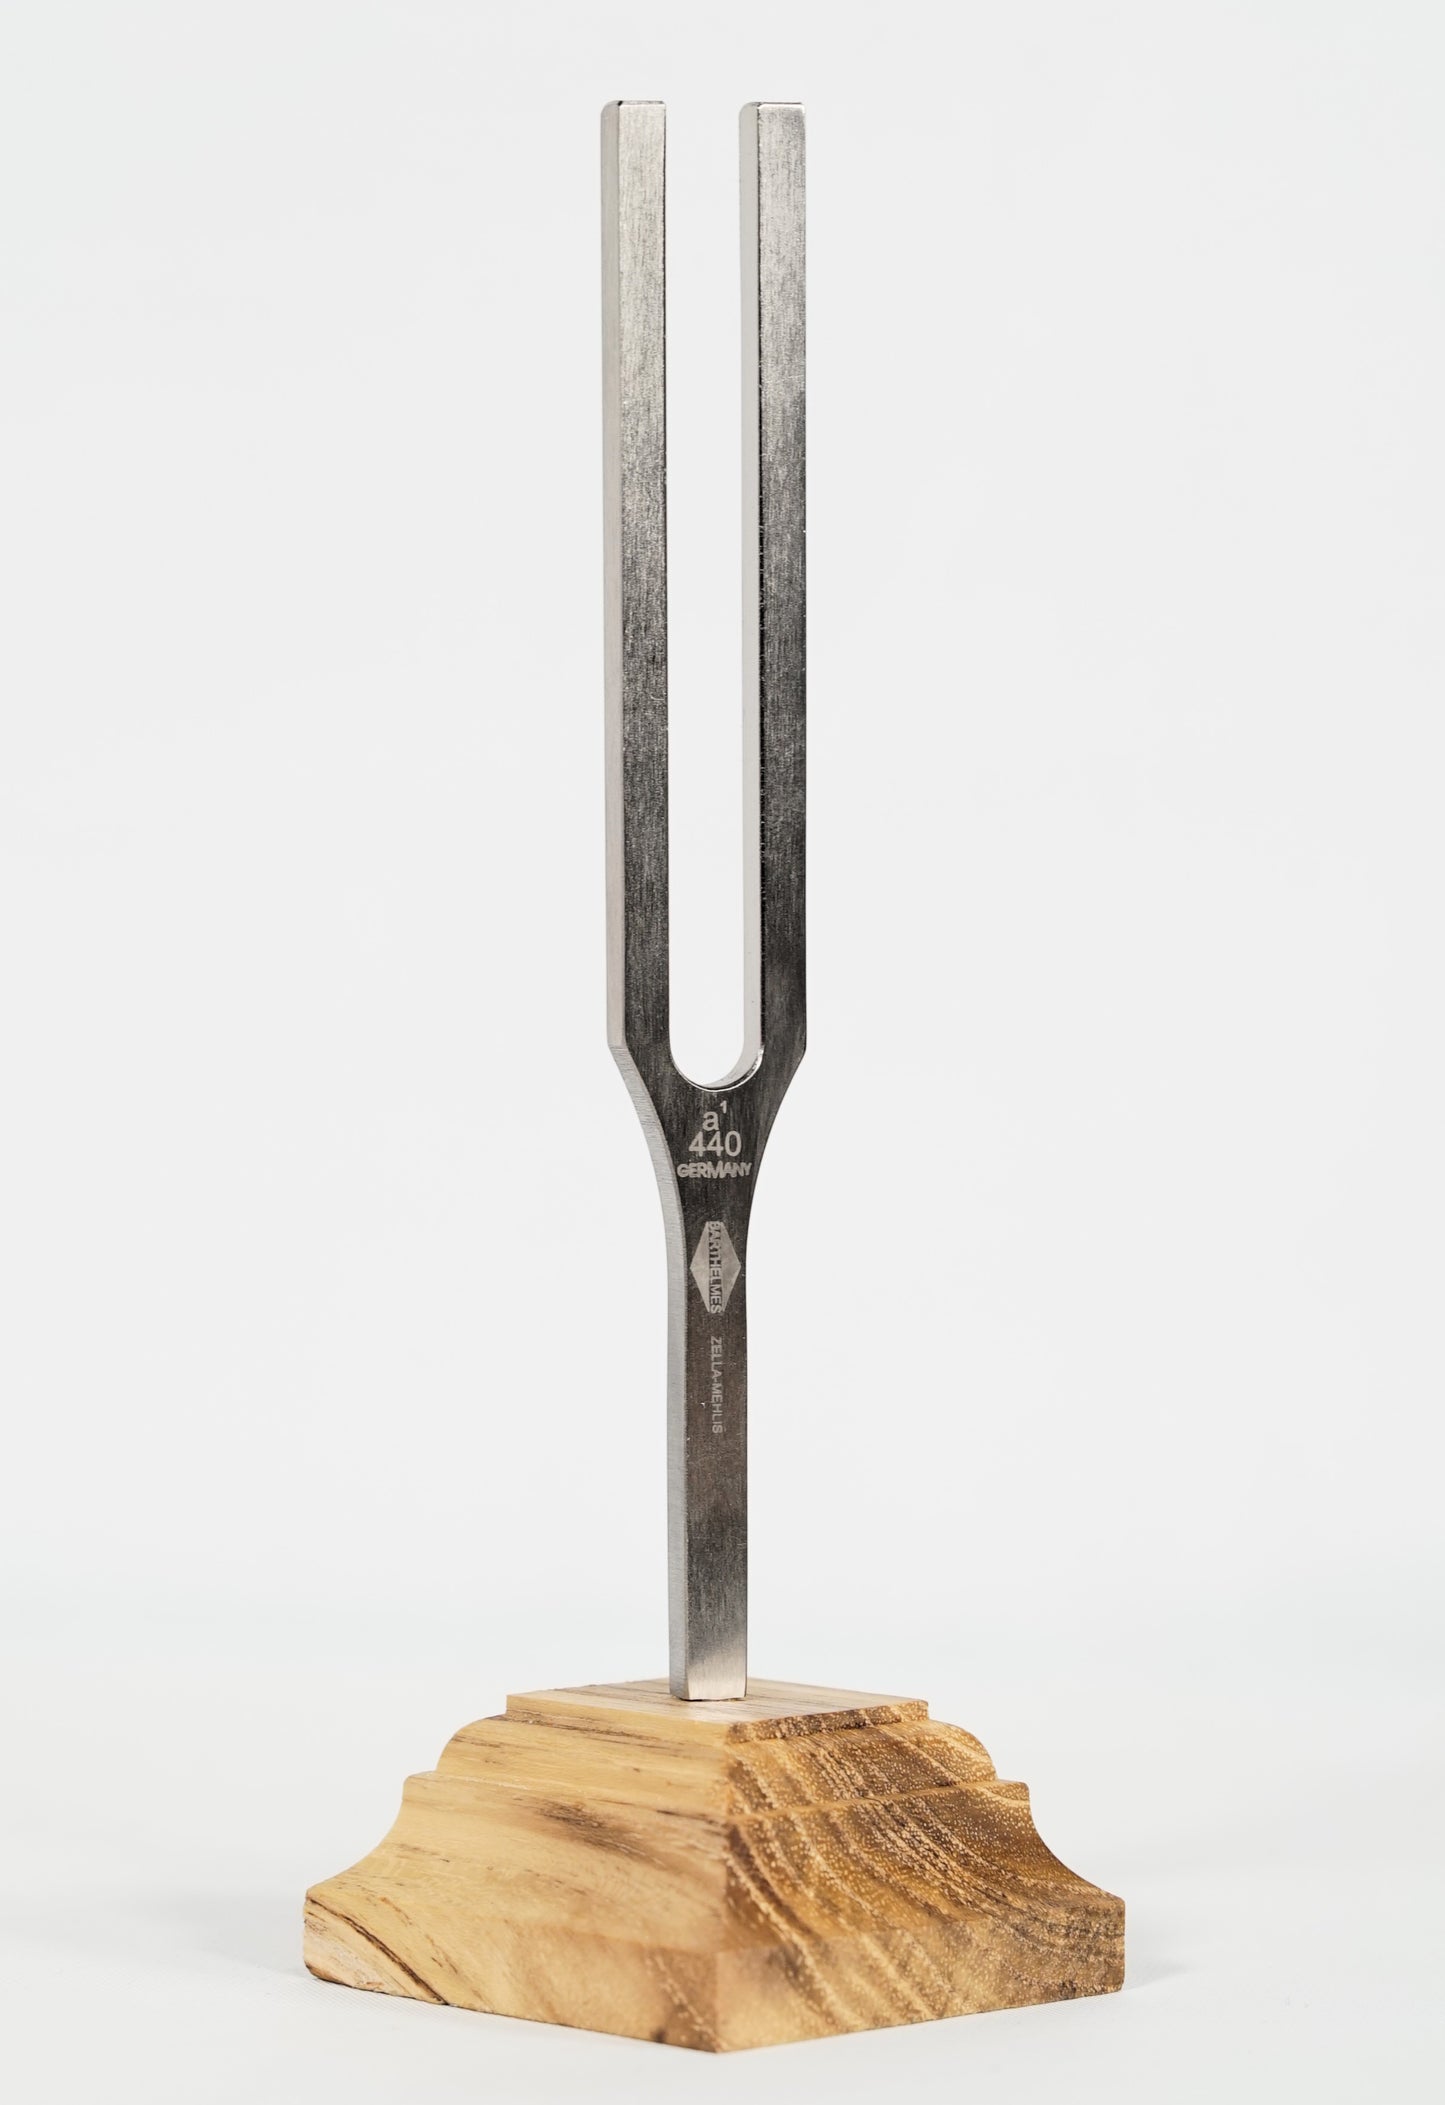 Barthelmes tuning fork a 440 Hz on a wooden base